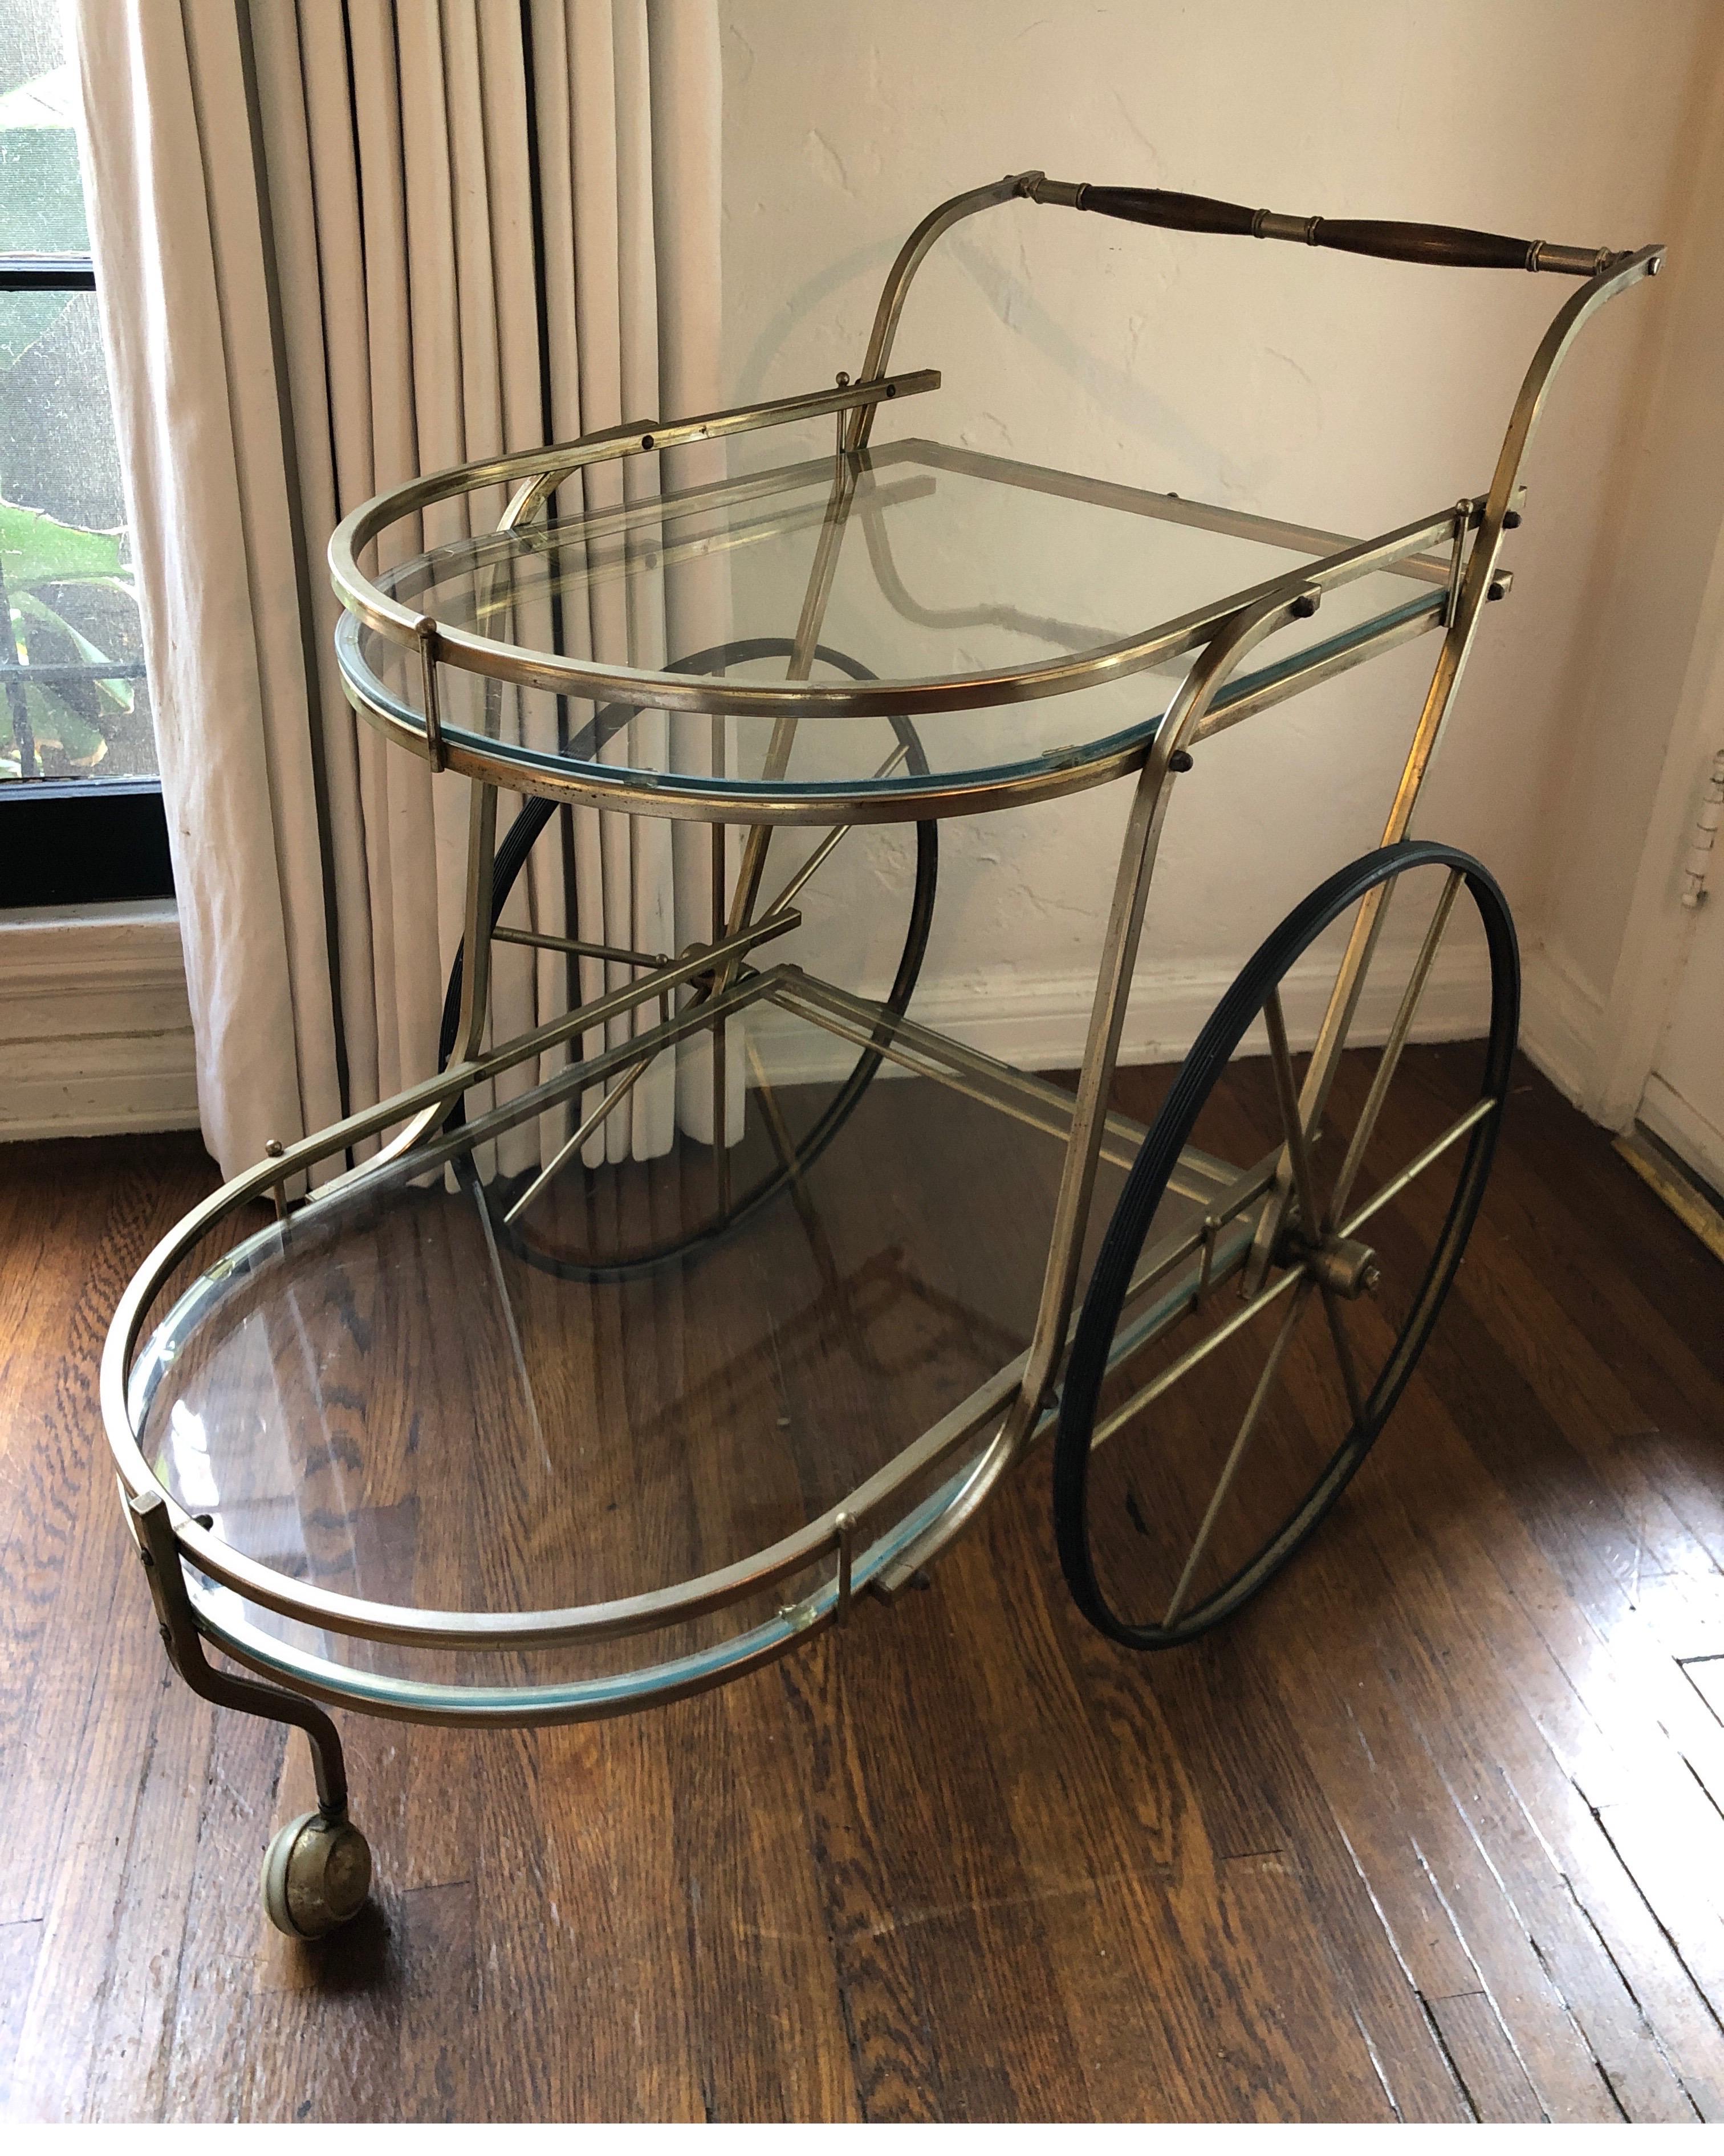 Large Italian two-tiered bar car. Brass finish with clear glass shelves. Two large wheels on each side that glide smoothly and one front wheel/caster.
Walnut handles.
Overall good condition with some signs of age on brass consistent with age.